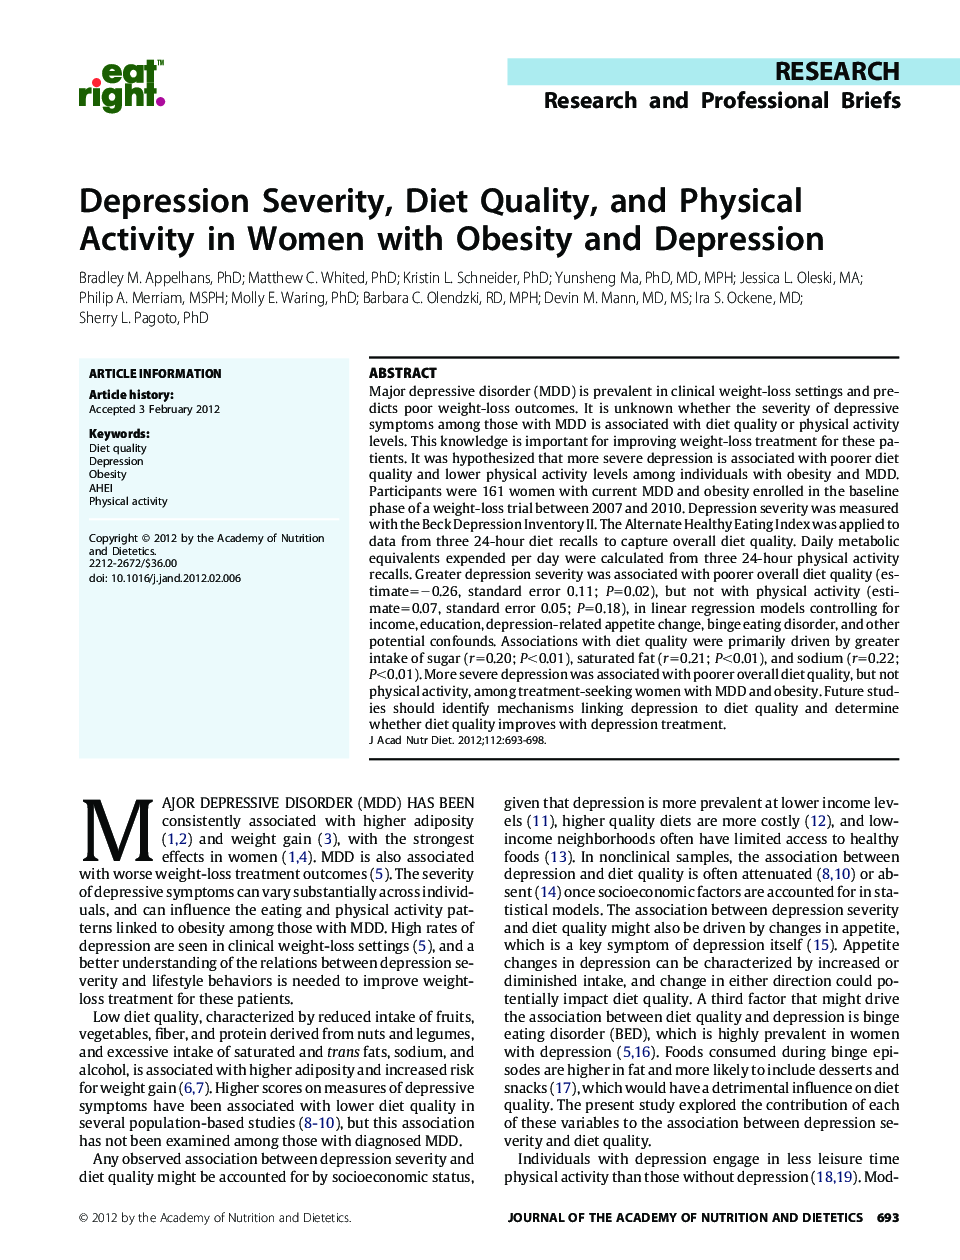 Depression Severity, Diet Quality, and Physical Activity in Women with Obesity and Depression 